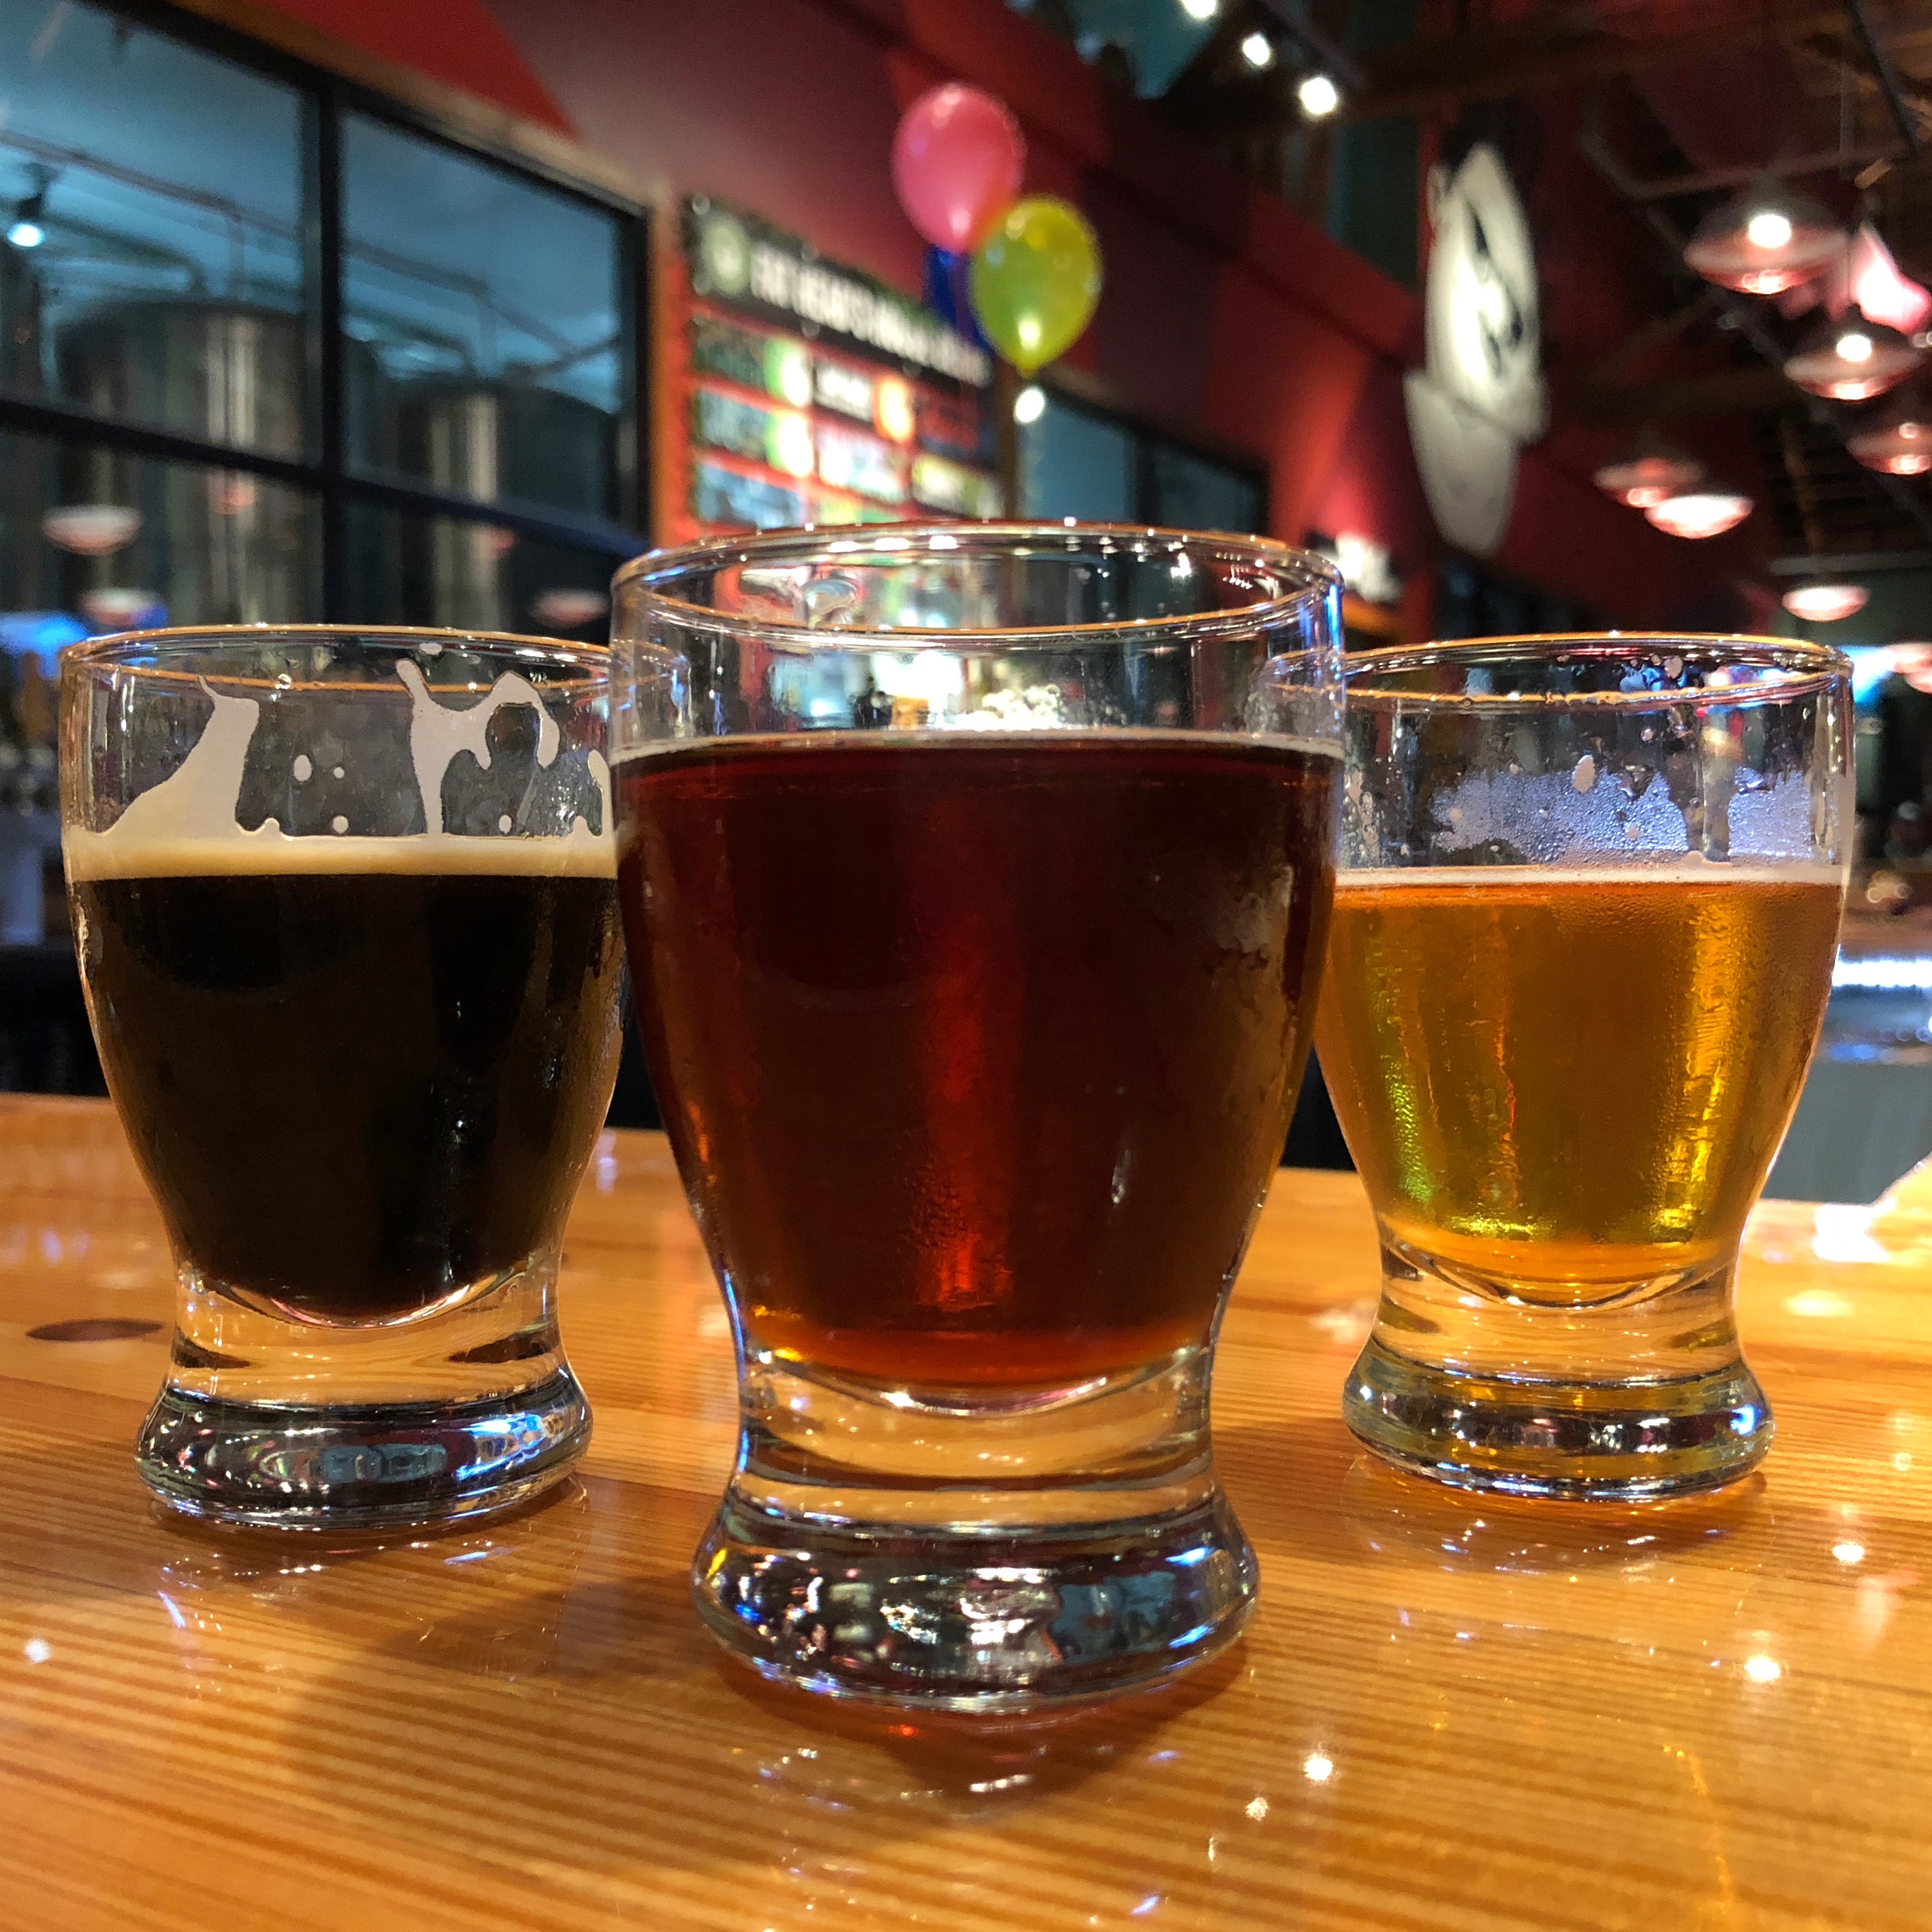 Fat Head's Brewery celebrated its 3rd Anniversary in early November. It later announced that the brewery will change names in the coming months.